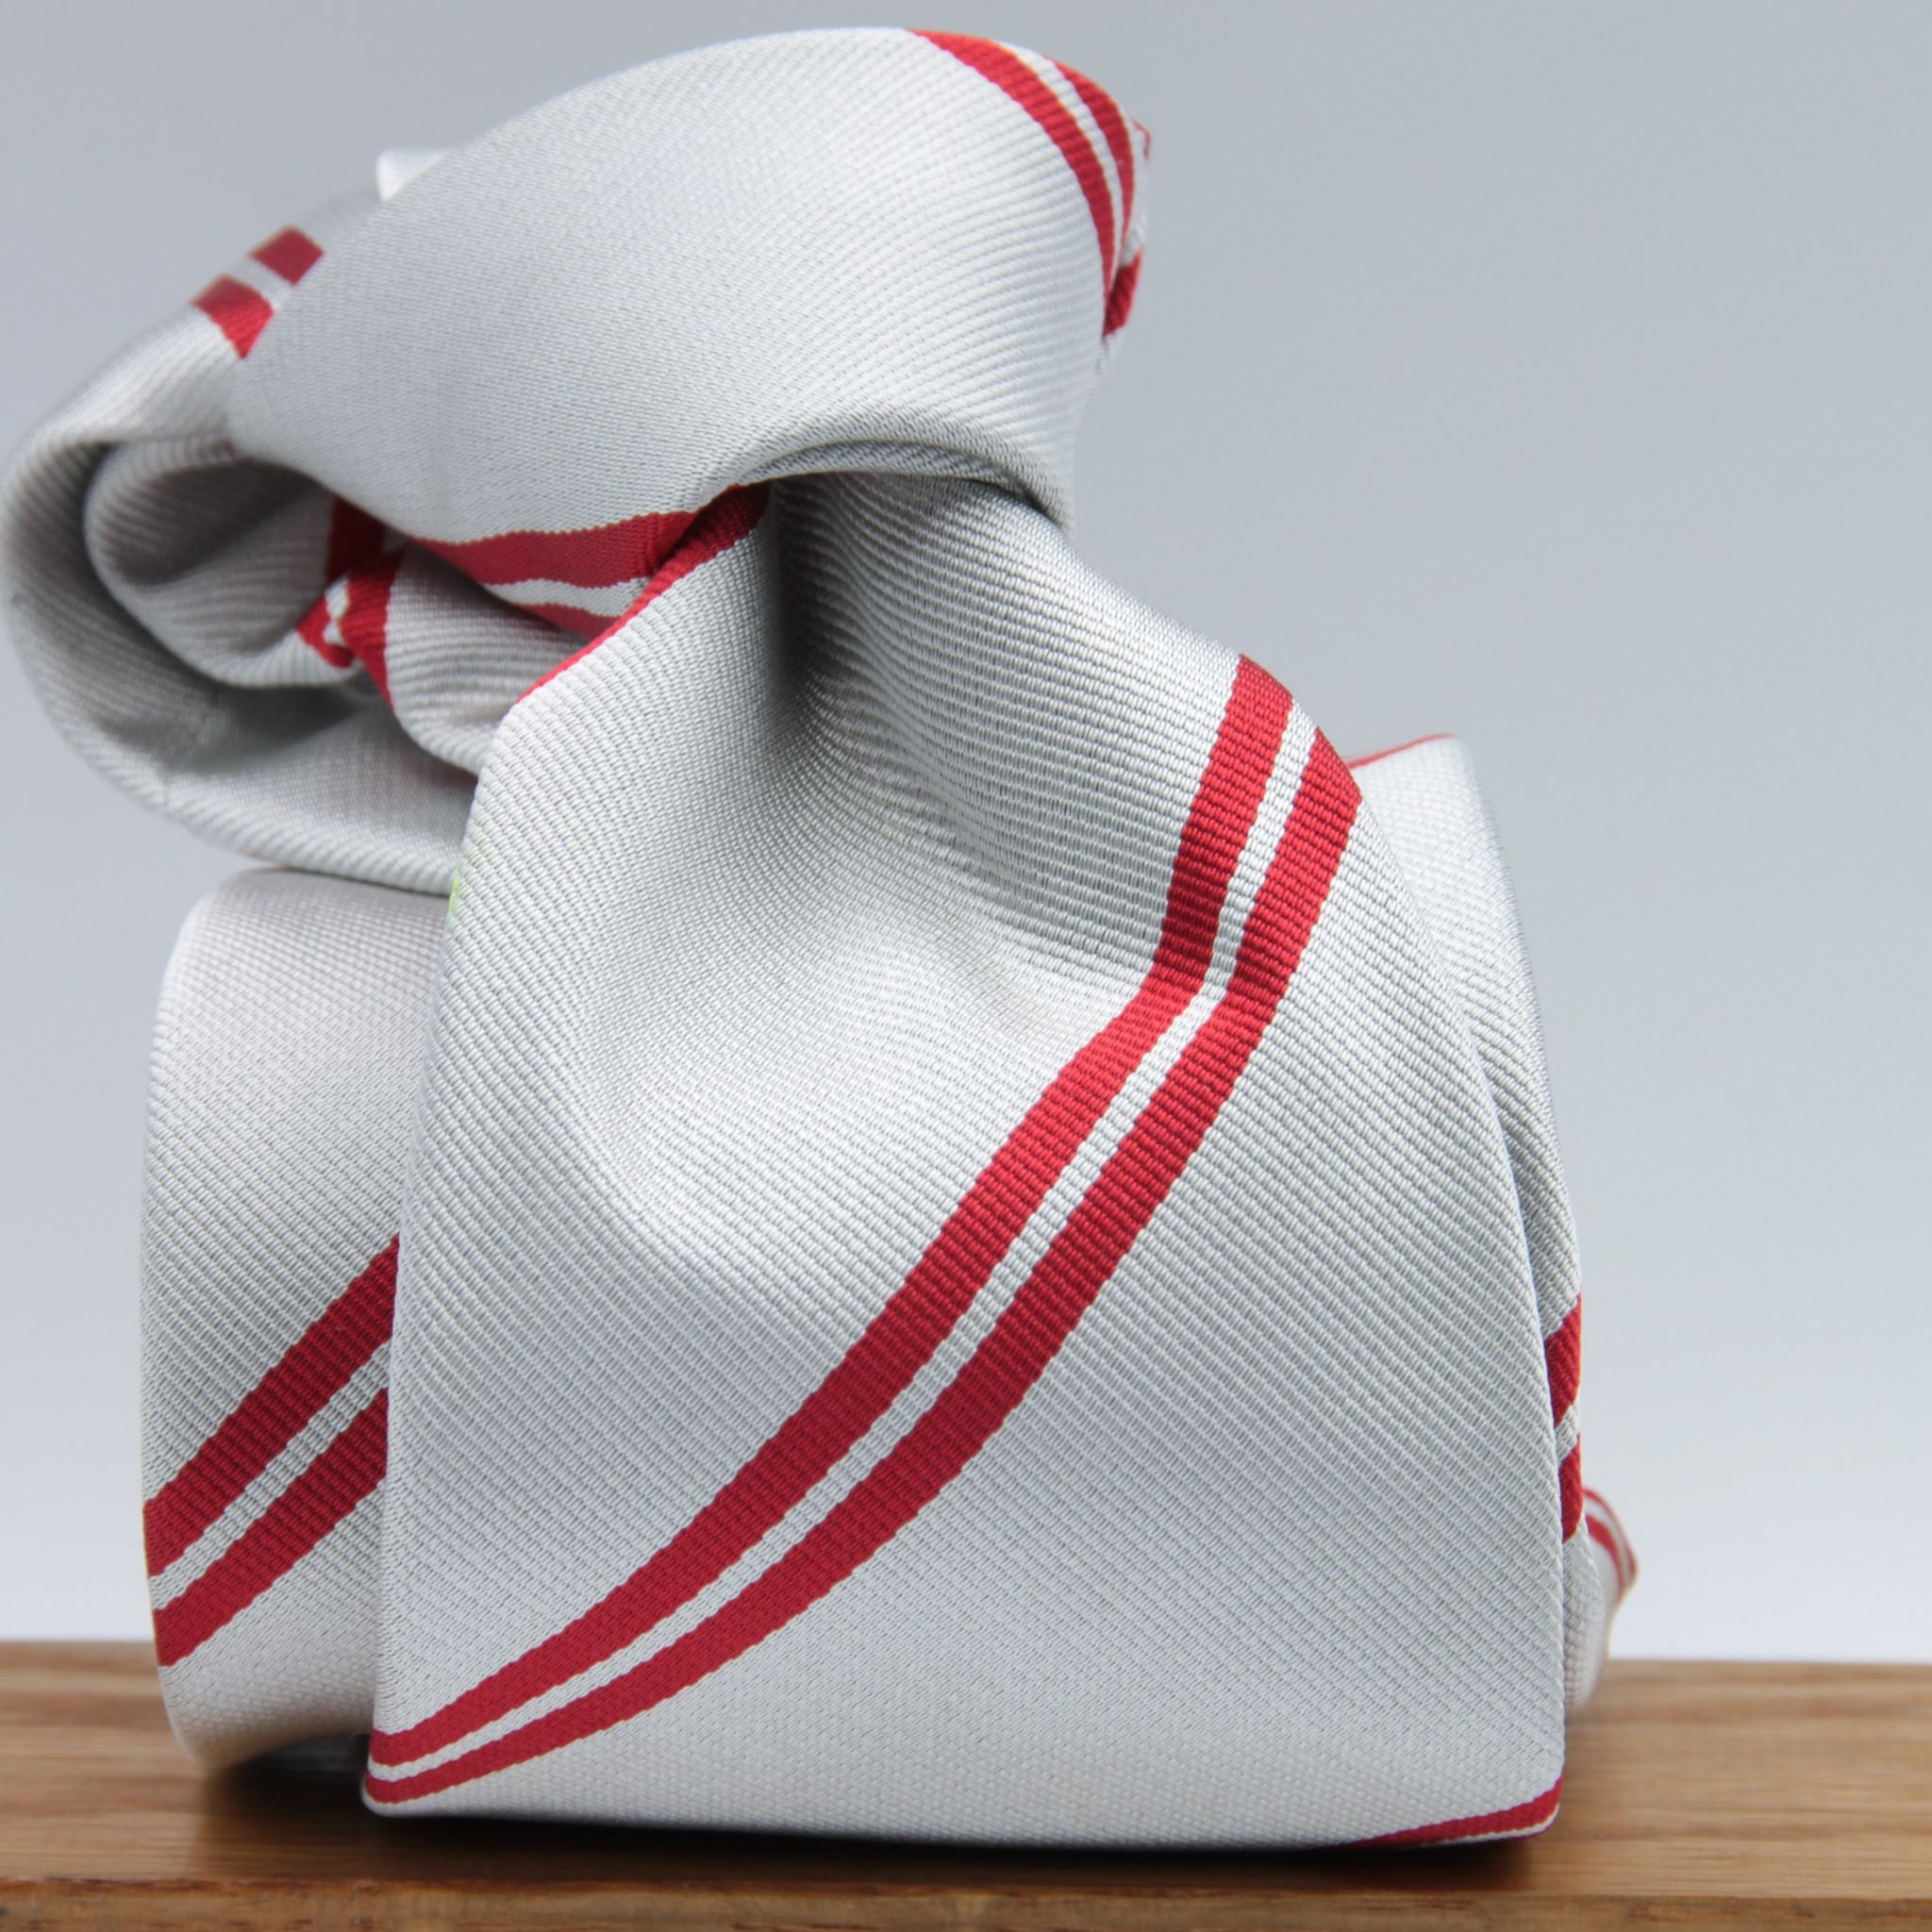 Holliday & Brown for Cruciani & Bella 100% Silk Tipped Jacquard  Regimental "St. John's Summer Amalgamated" Off-White and Red stripe tie Handmade in Italy 9 cm x 148 cm #6607